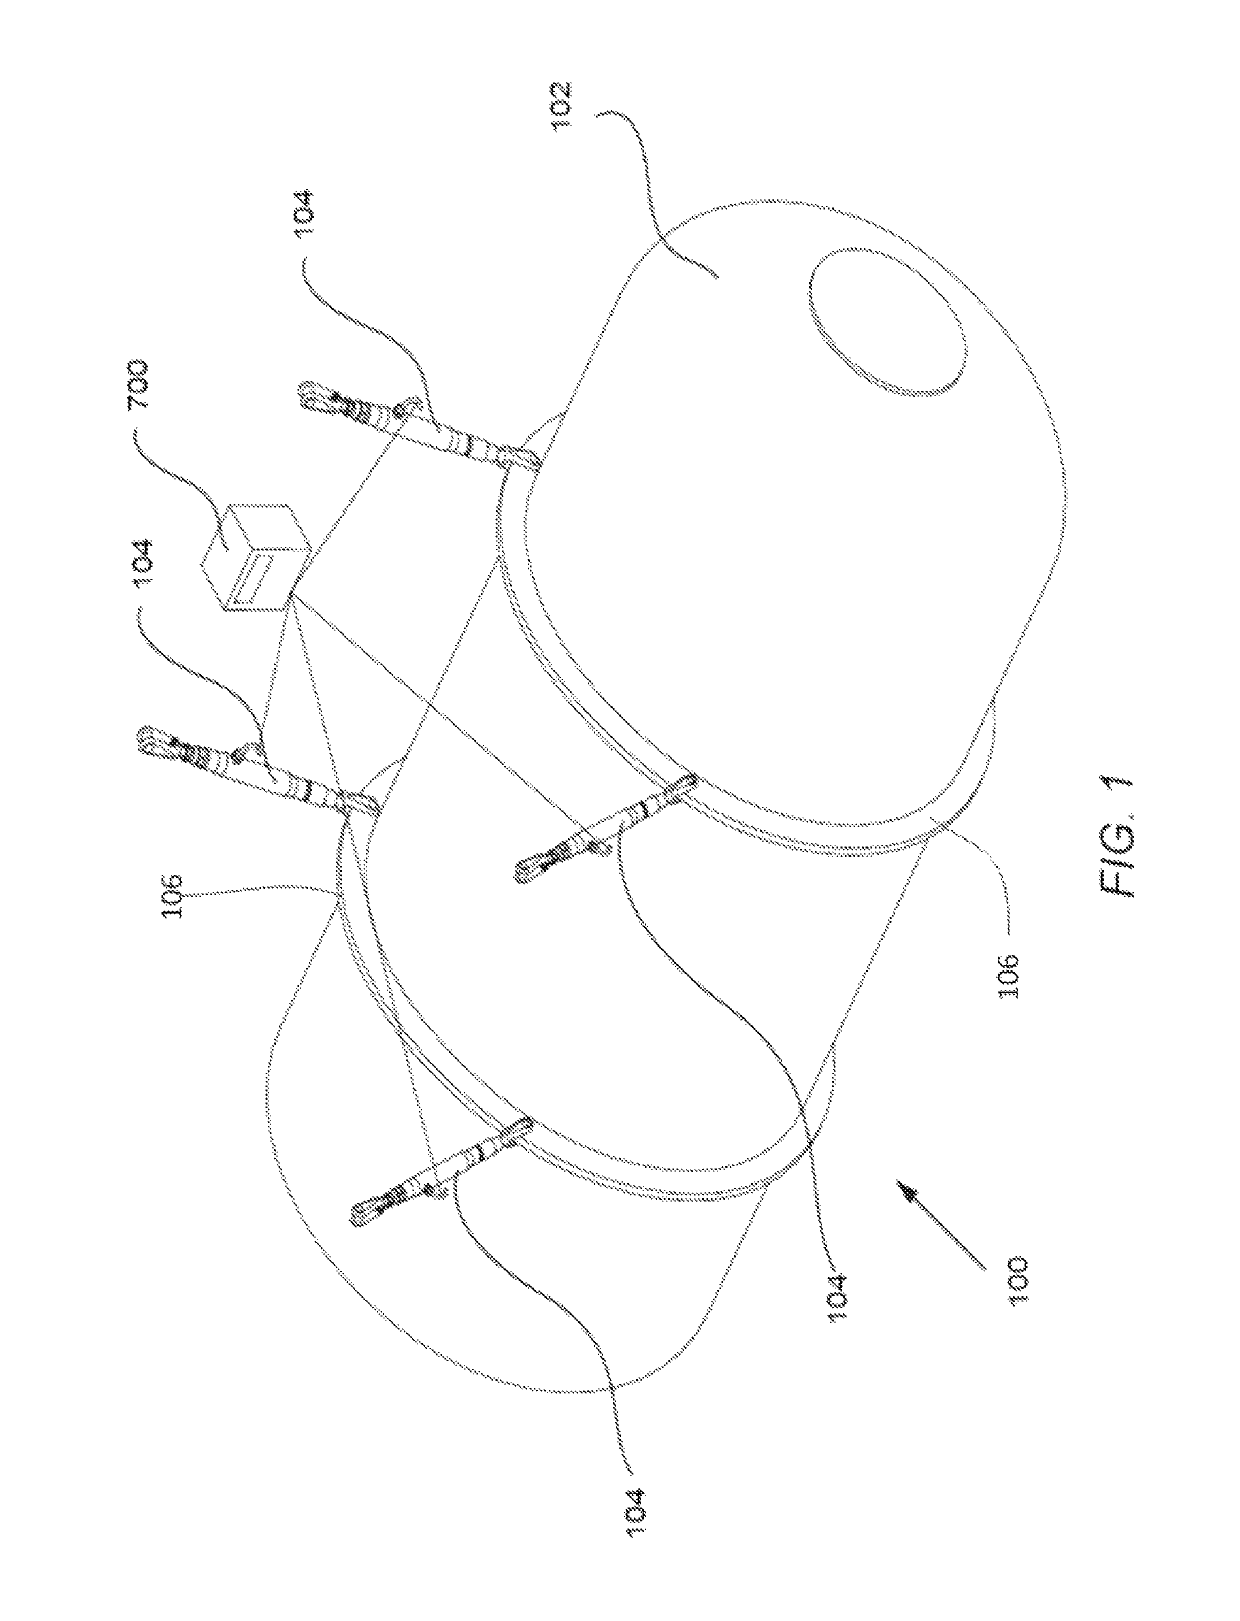 Storage tank having an active support rod measurement system